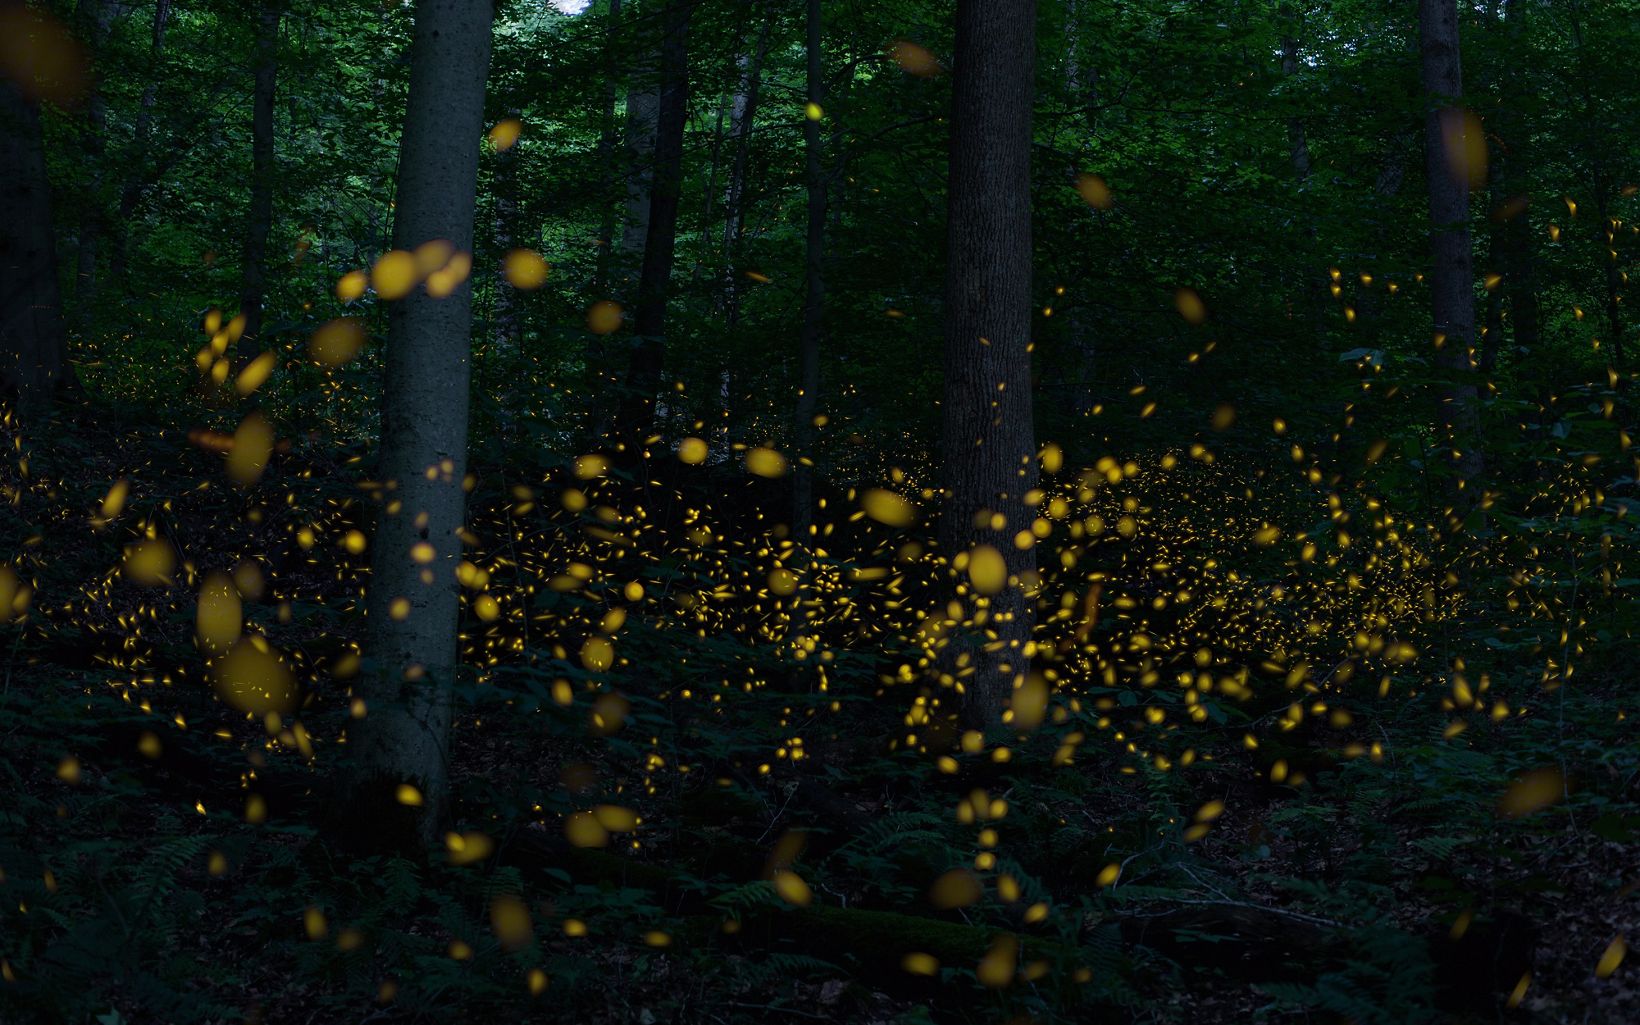 Synchronous Fireflies Each summer, thanks to our land protection efforts there, the unique phenomenon of synchronous fireflies sparkling together can be seen at the Edge of Appalachia Preserve. © Danae Wolfe/TNC